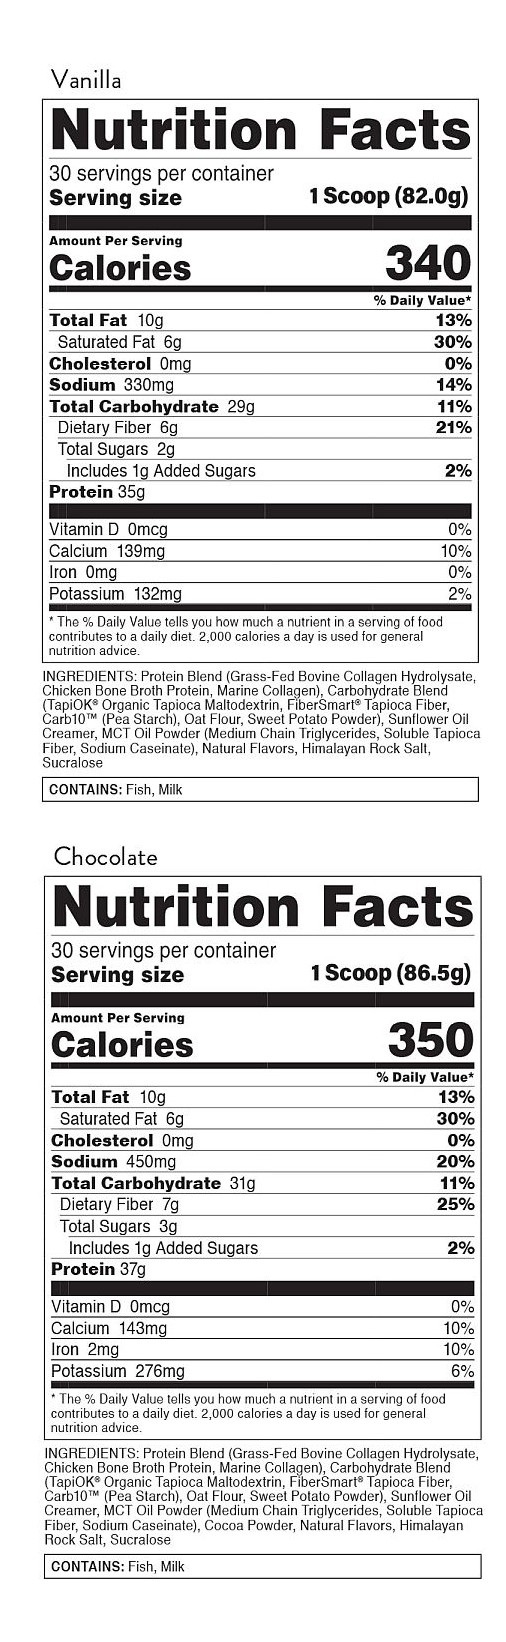 Nutritional facts for vanilla and chocolate flavors show calories, sugars, protein, vitamins, fat content, ingredients are listed including allergen info.